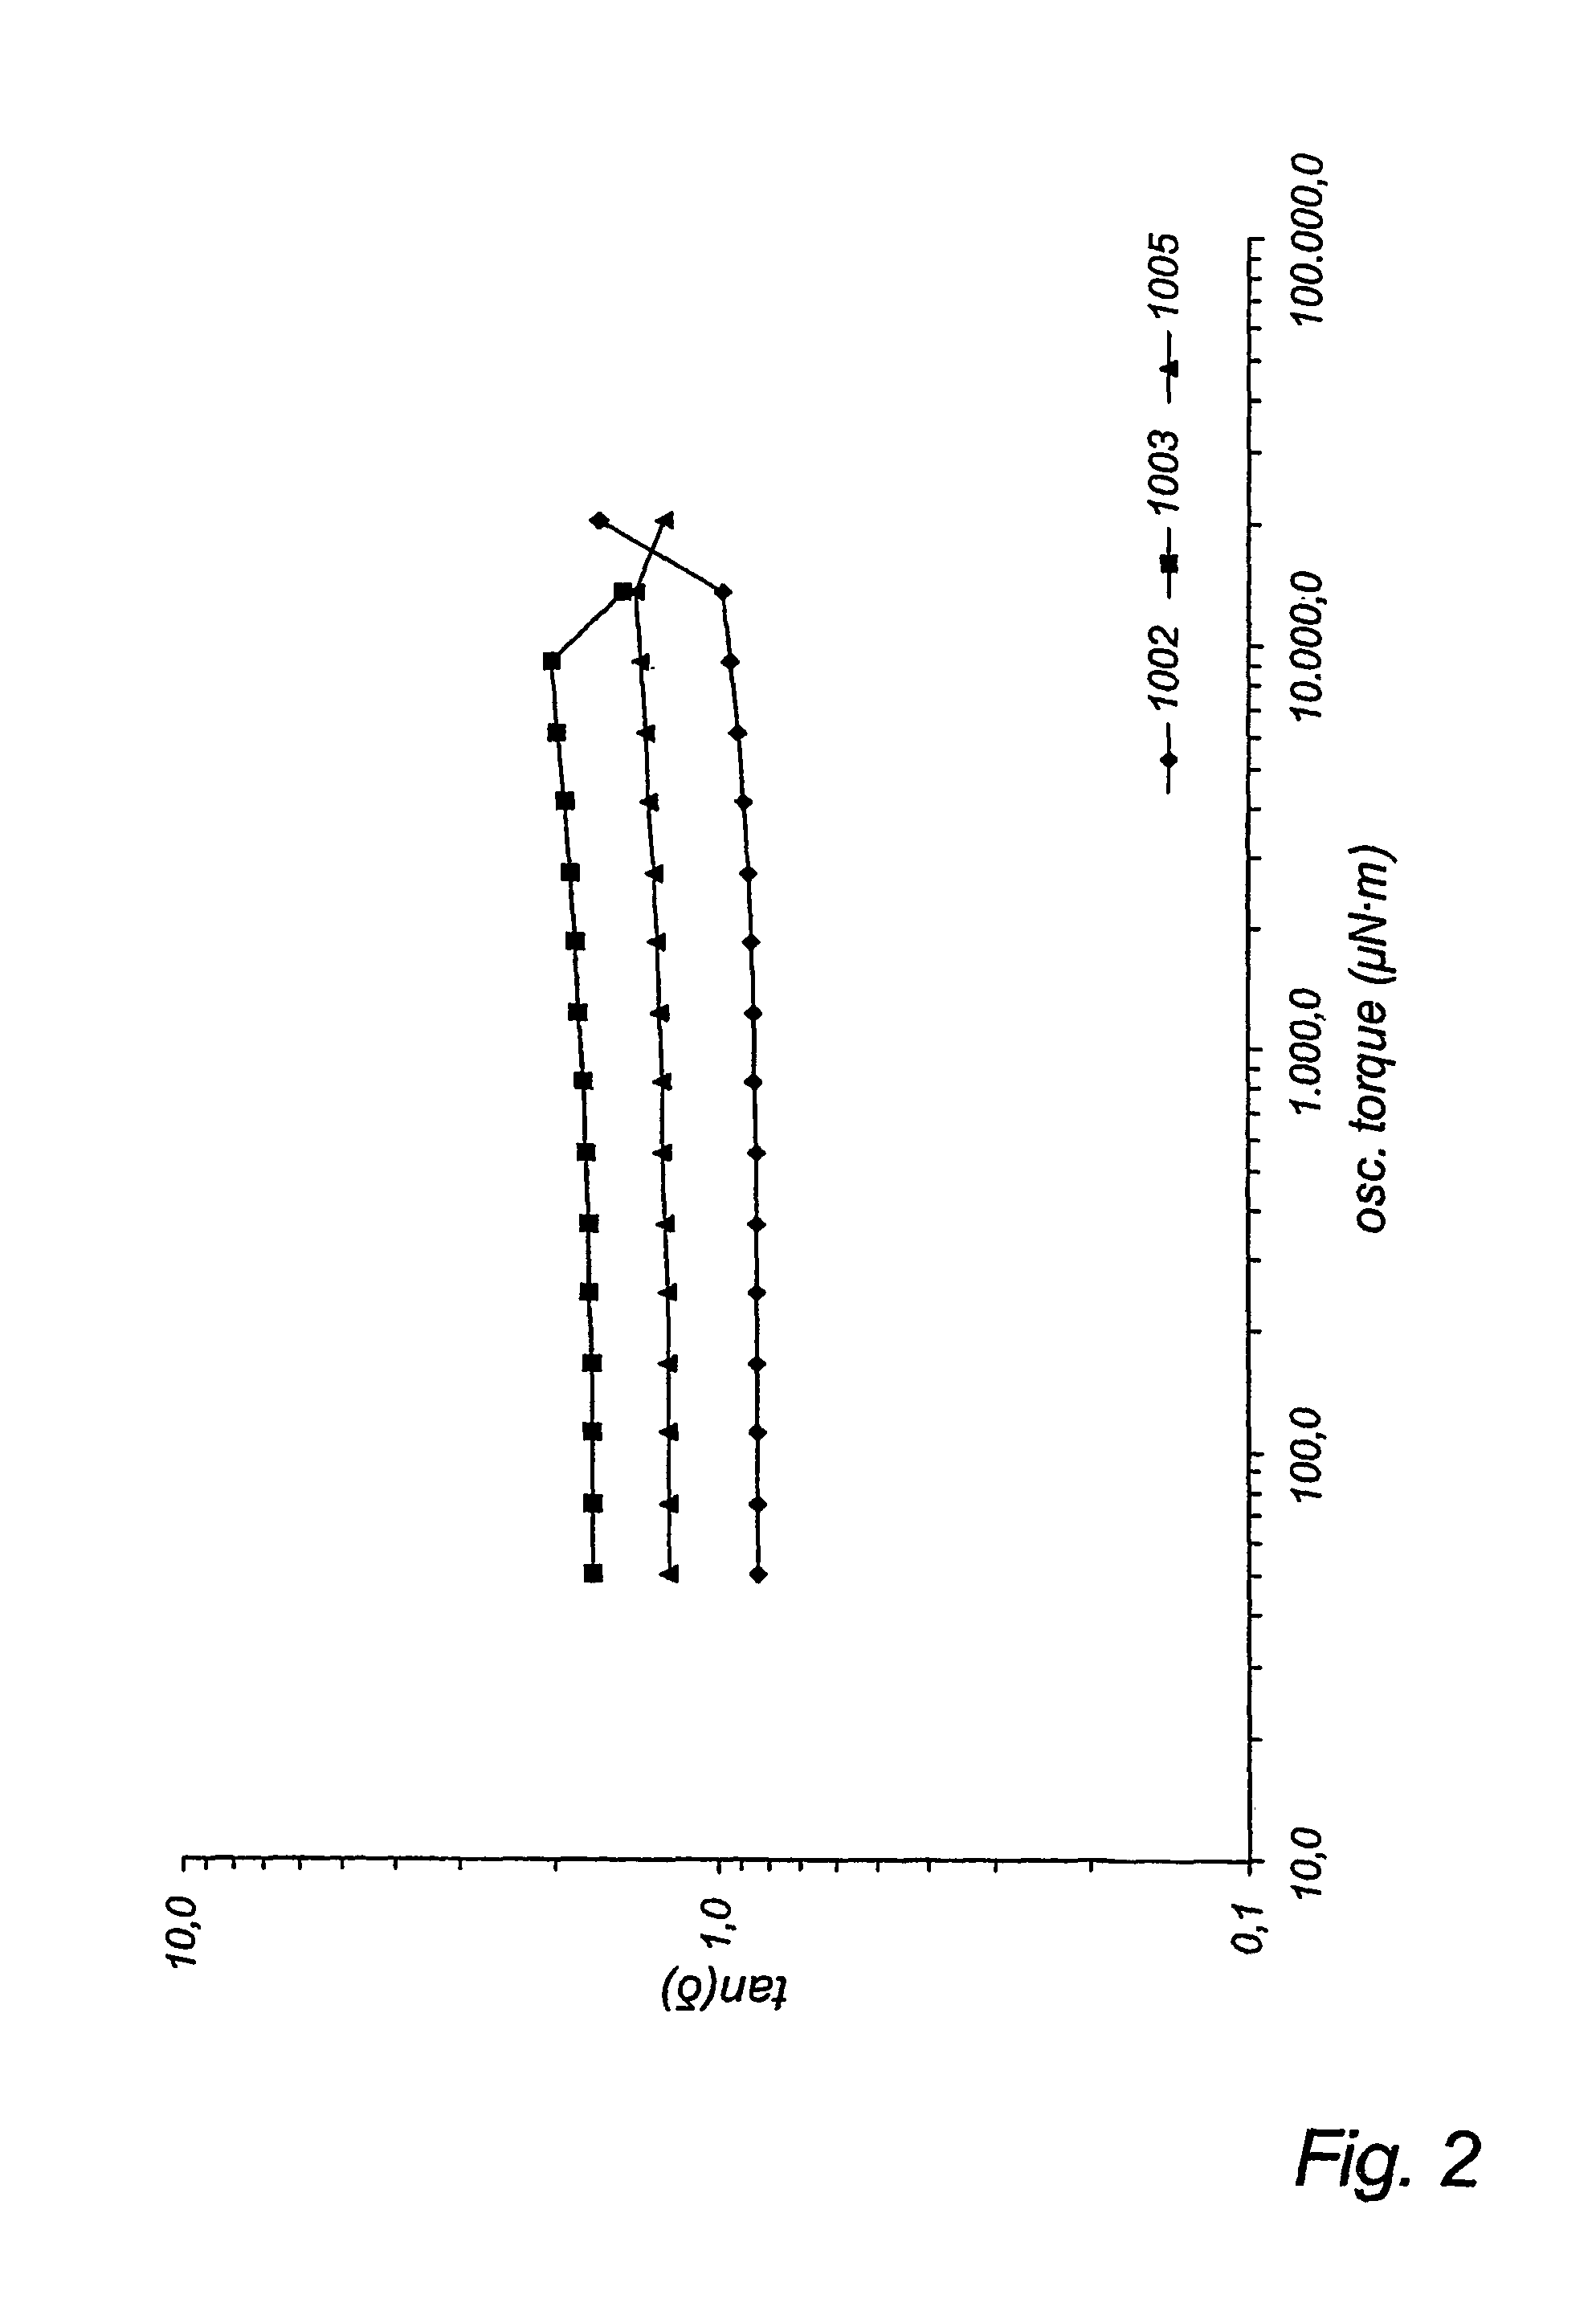 Biodegradable chewing gum comprising at least one high molecular weight biodegradable polymer